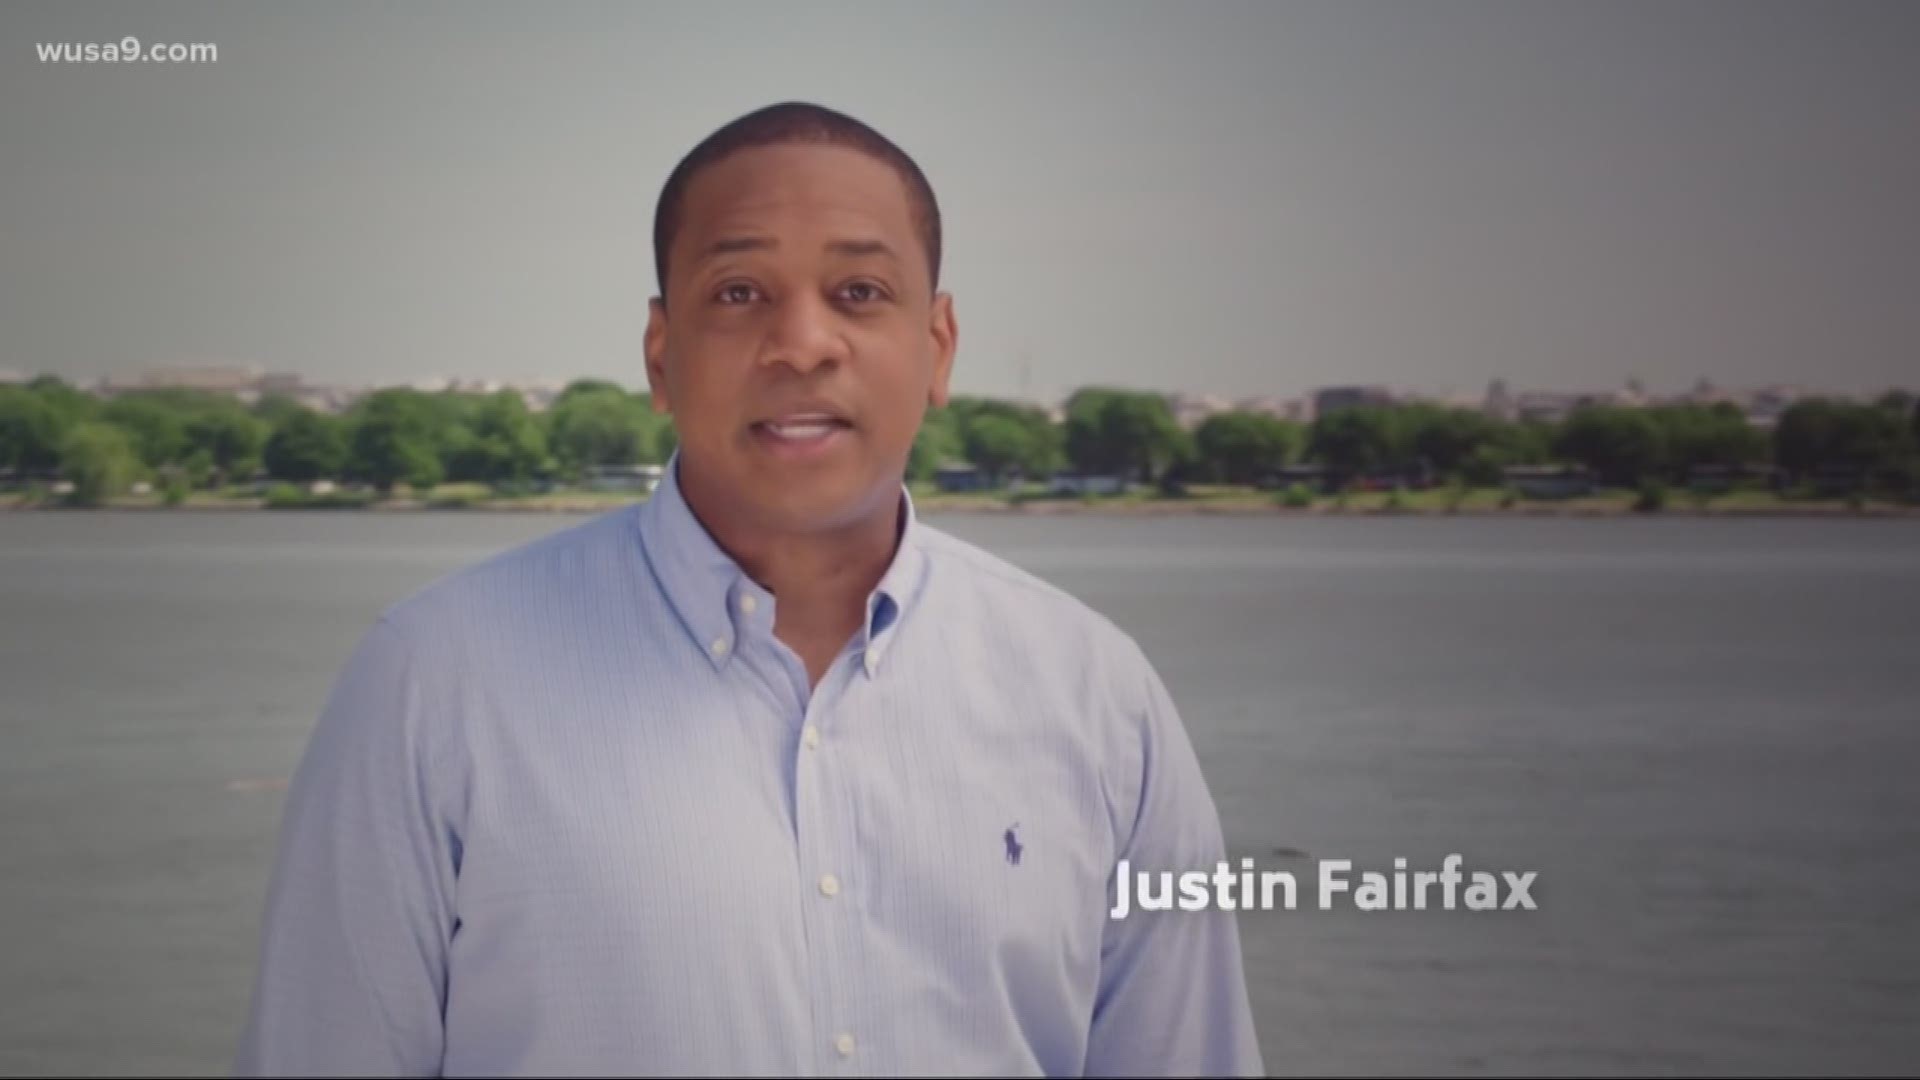 As a descendant of slaves, Fairfax has taken stands on race-related issues and worked to bridge the racial divide in Virginia.